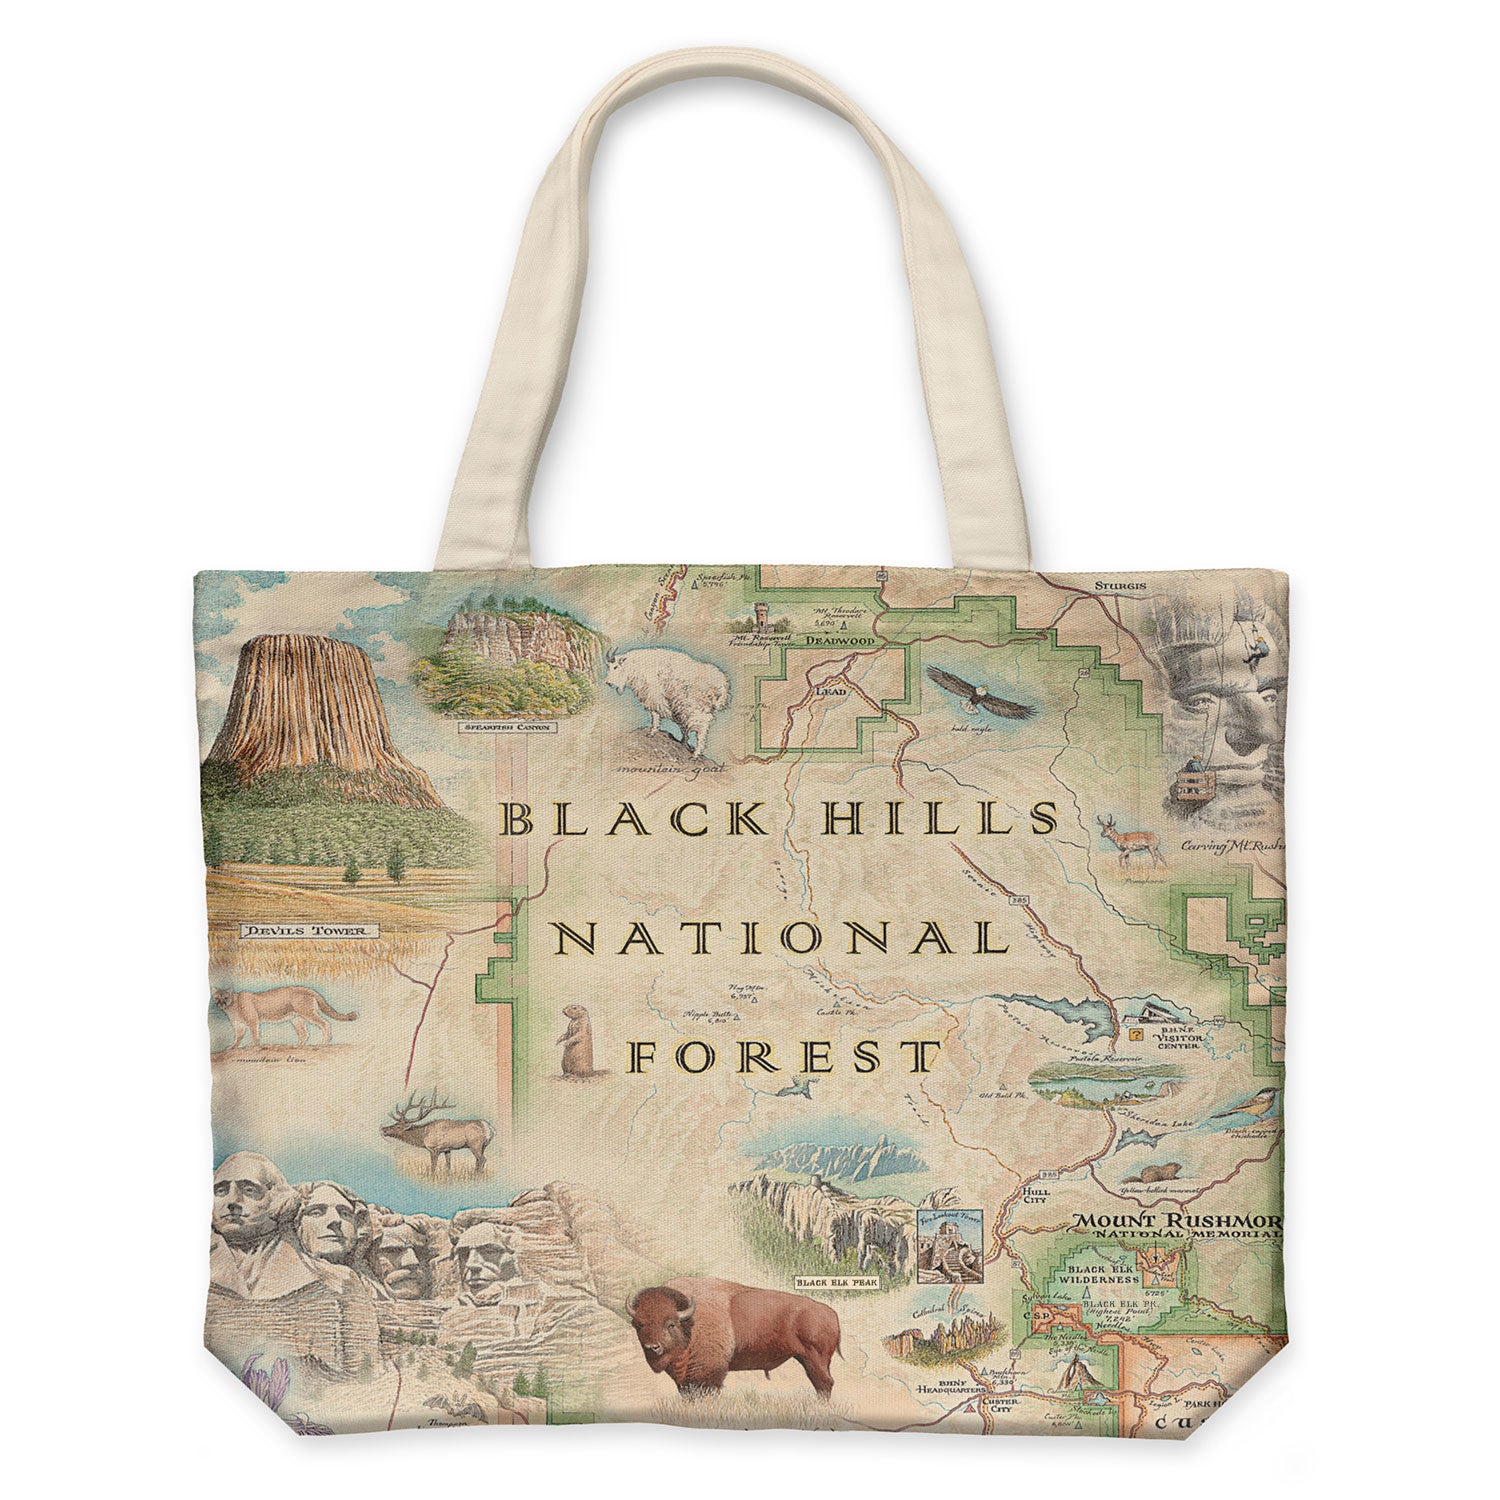 Black Hills National Forest Map Canvas Tote Bag in earth tone colors. Featuring cities like Rapid City, Spearhead, Rapid City, and Sturgis. Mount Rushmore, Devils Tower, Jewel Cave National Monument, Custards, and Wind Cave National Park. Flora and Fauna illustrations include bison, elk, mountain goats, birds, pine trees, and native flowers. 